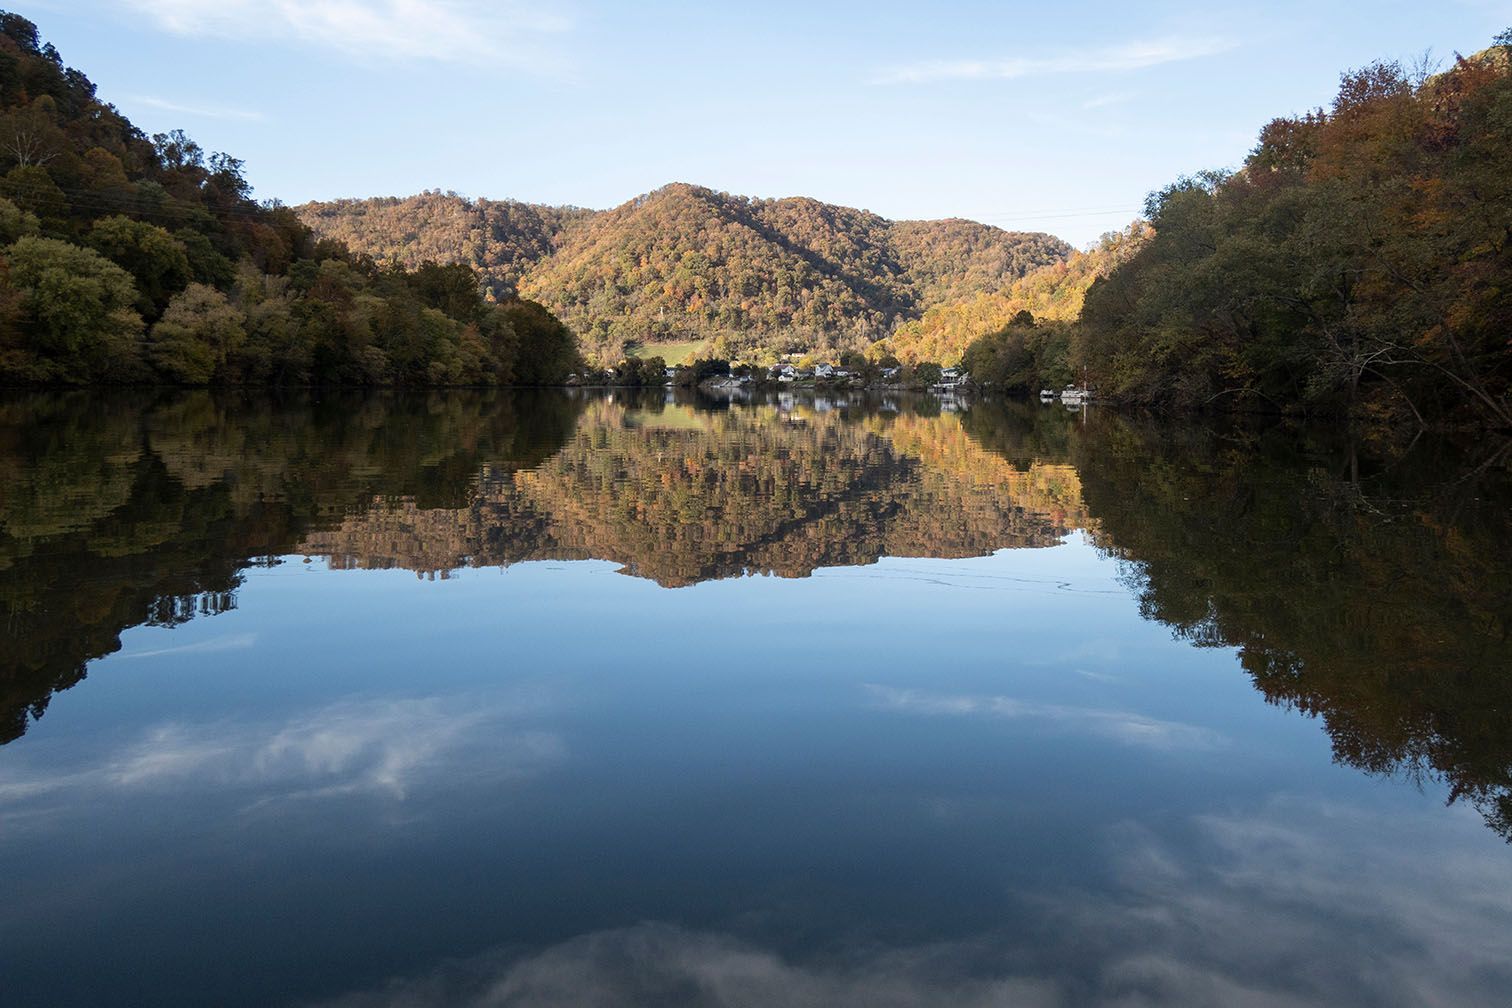 Tree-covered hills and a cloud-scattered sky reflected in calm water.